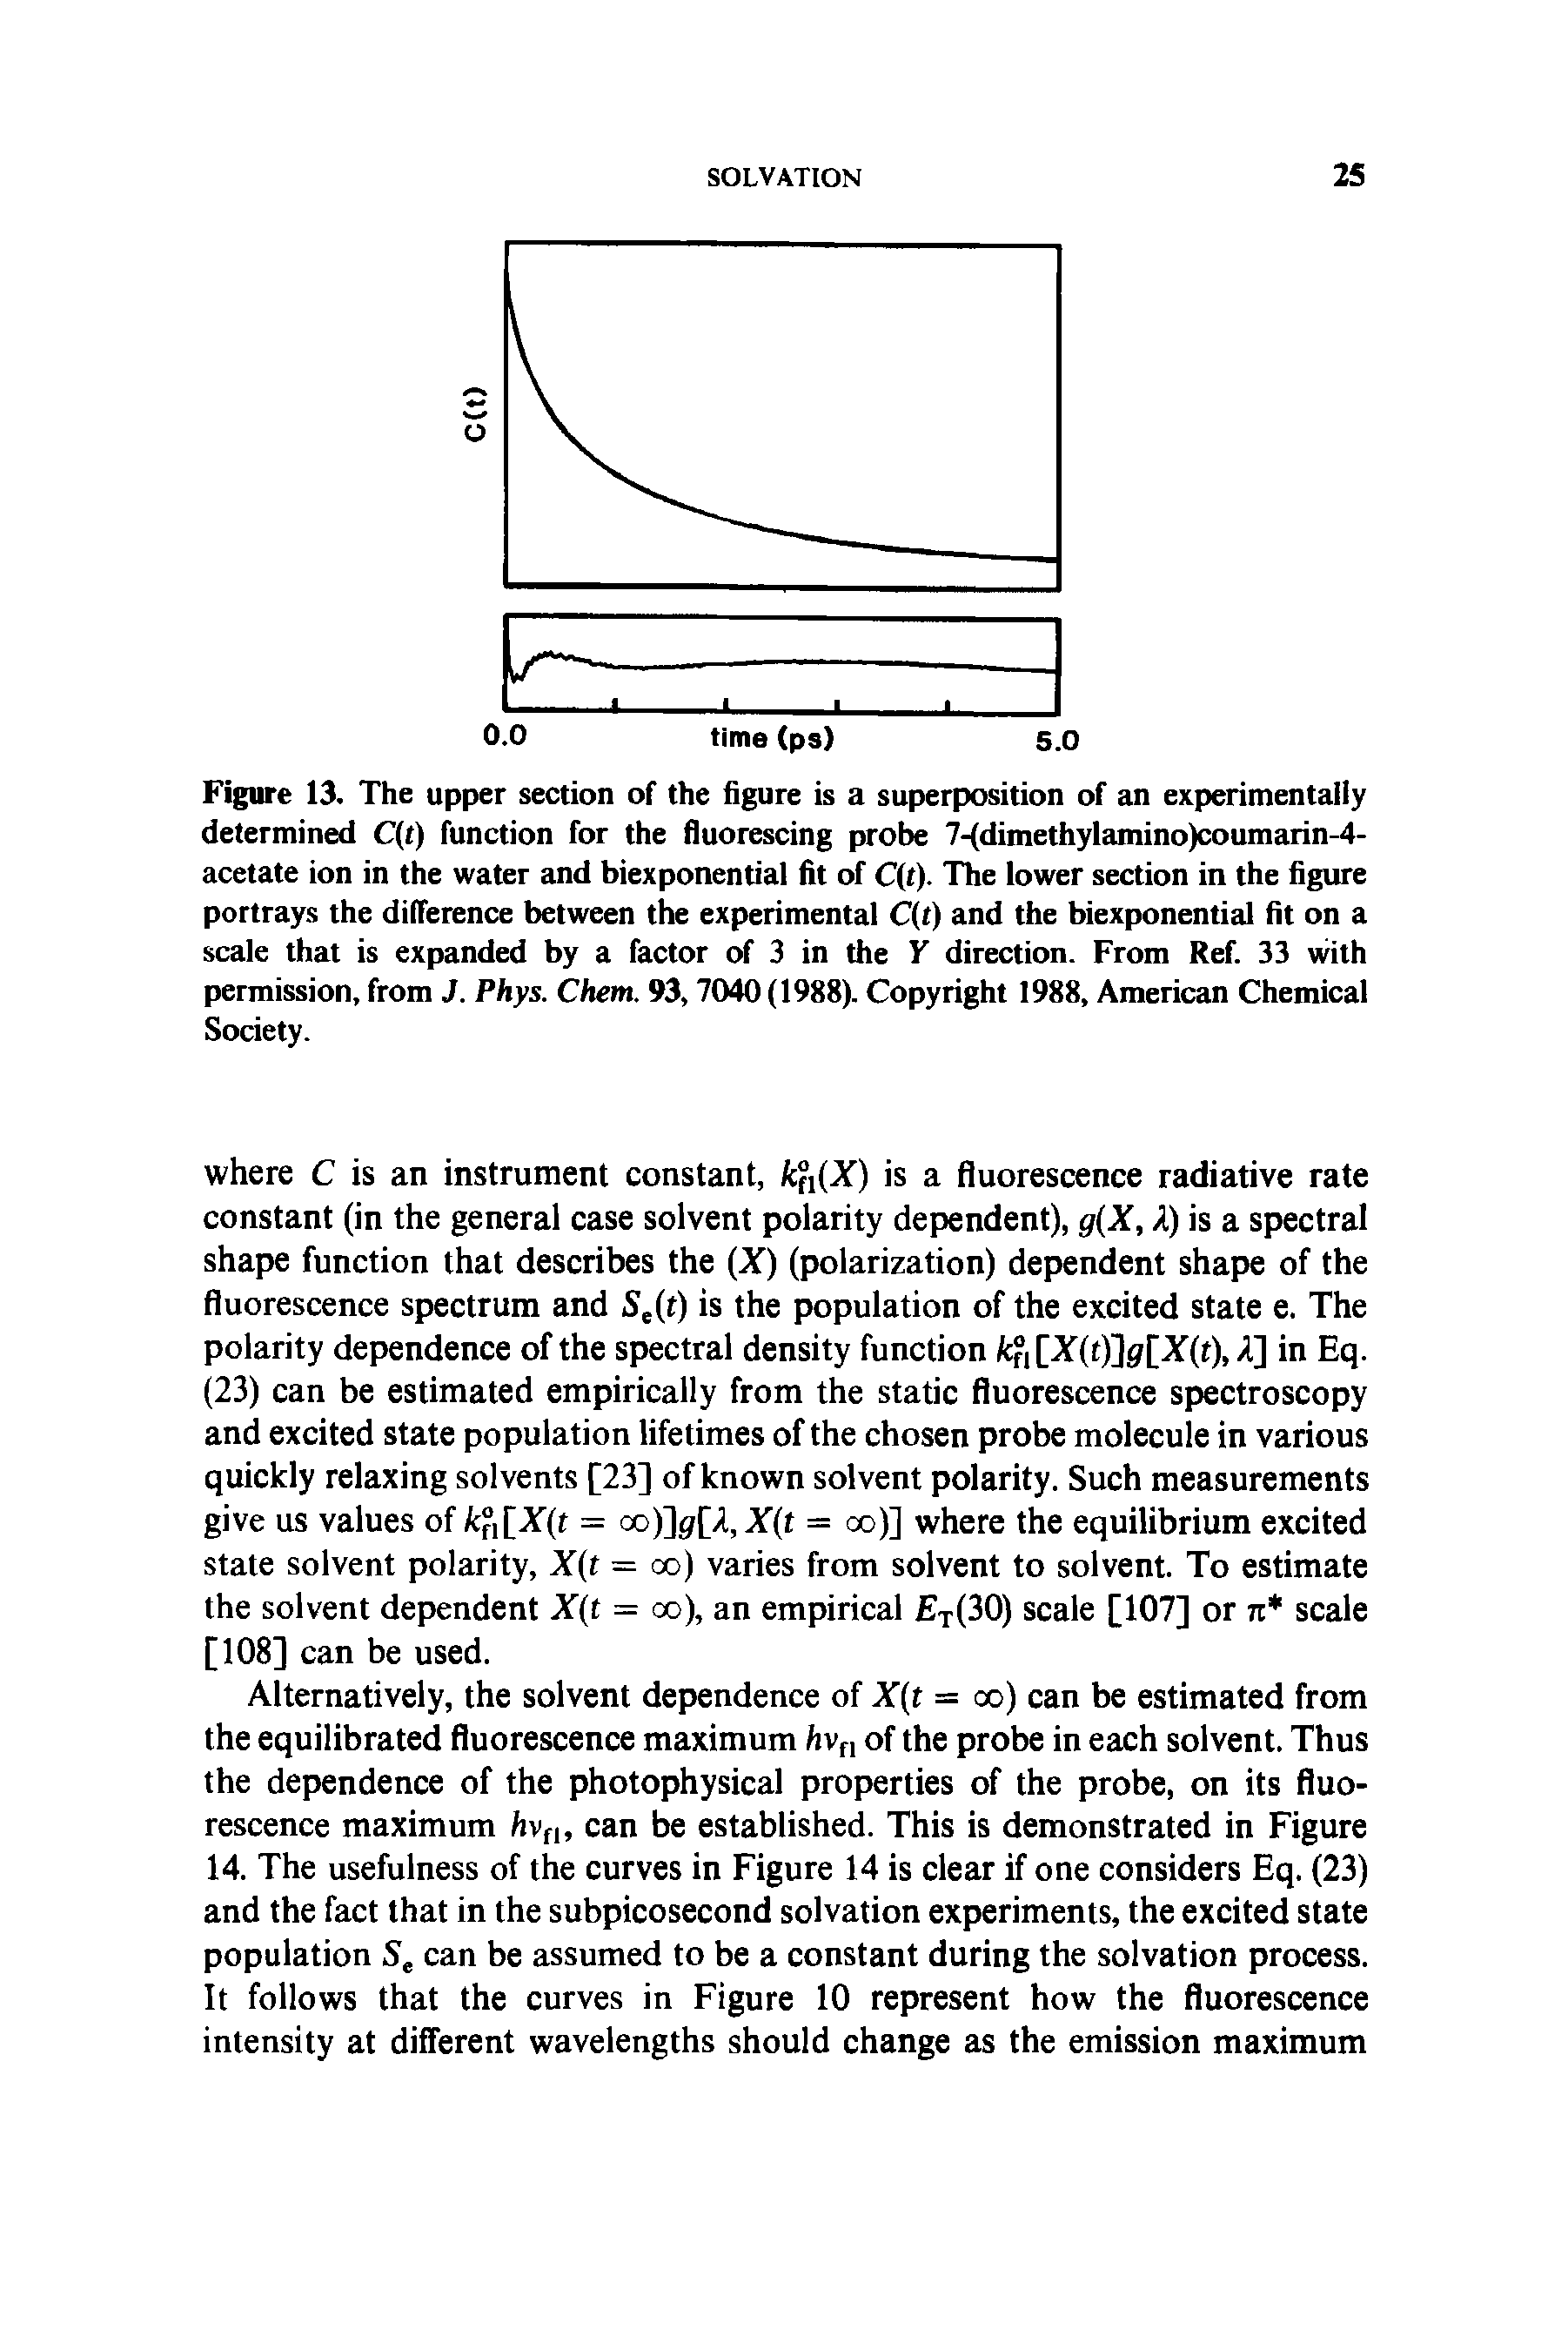 Figure 13. The upper section of the figure is a superposition of an experimentally determined C(f) function for the fluorescing probe 7-(dimethylamino)coumarin-4-acetate ion in the water and biexponential fit of C(t). The lower section in the figure portrays the difference between the experimental C(f) and the biexponential fit on a scale that is expanded by a factor of 3 in the Y direction. From Ref. 33 with permission, from J. Phys. Chem. 93,7040 (1988). Copyright 1988, American Chemical Society.